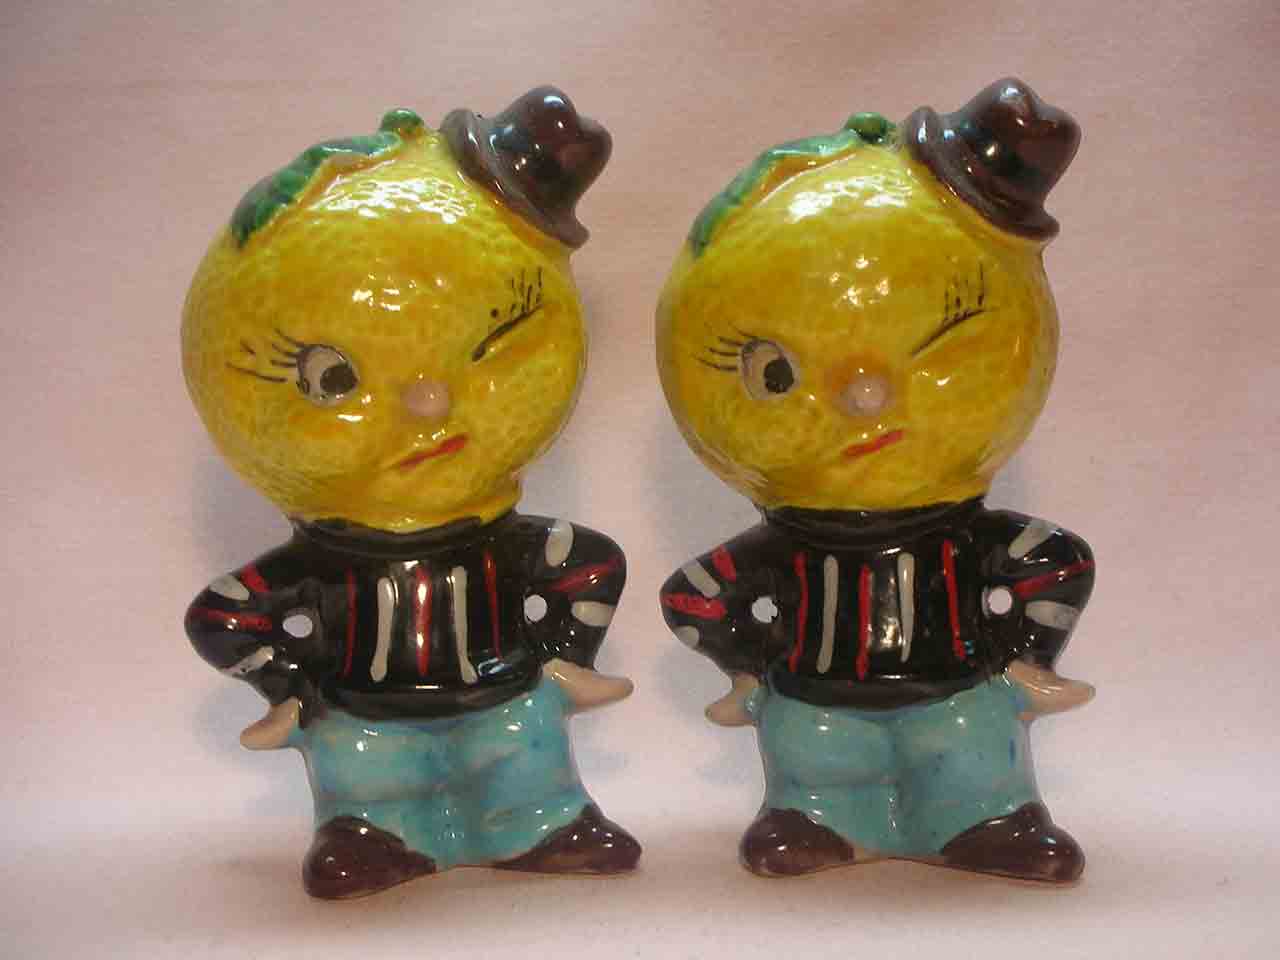 Anthropomorphic salt and pepper shakers called "2 of a Kind" - oranges